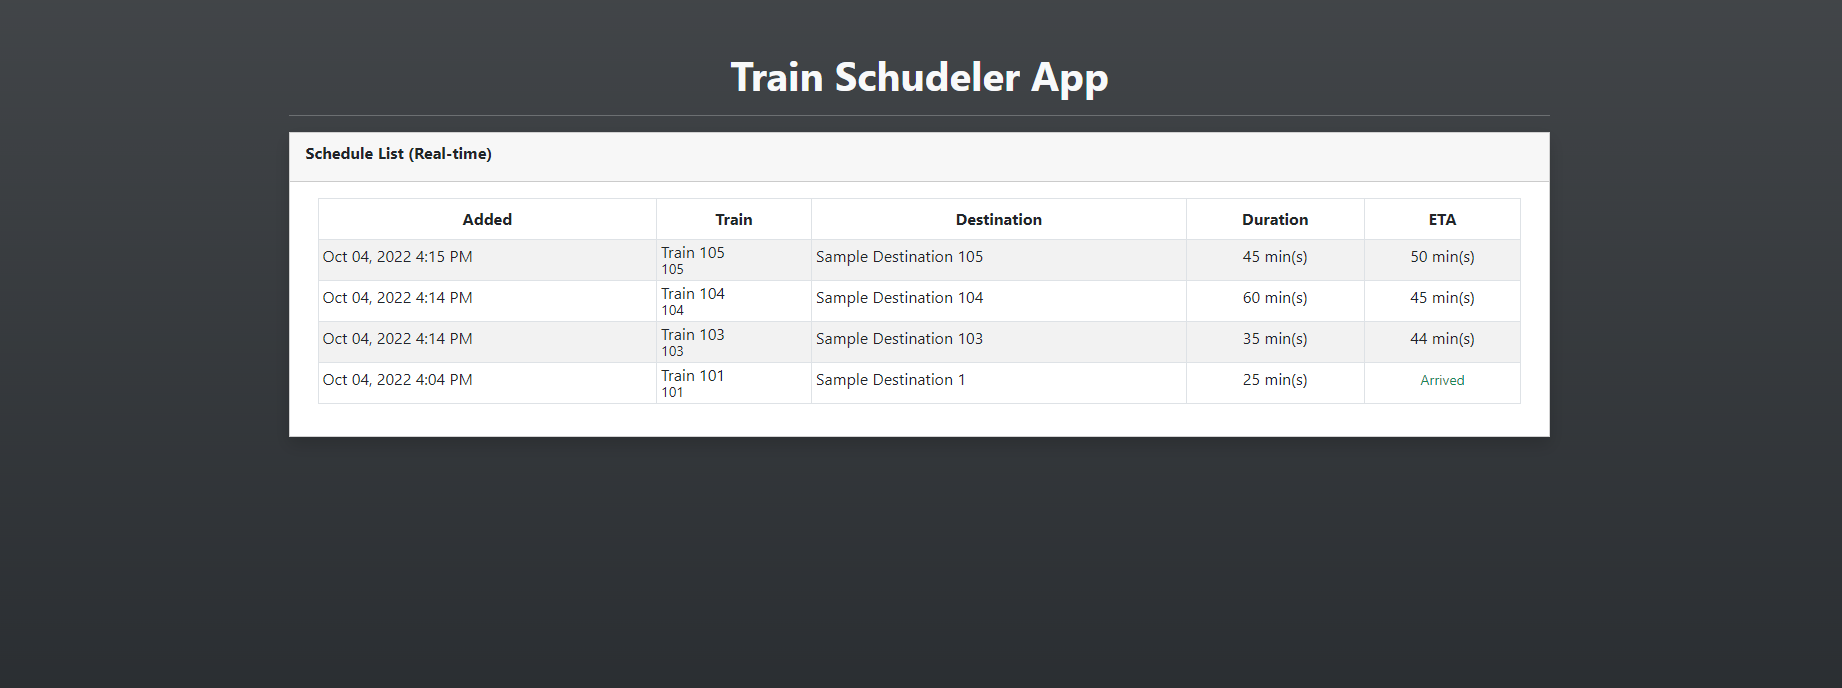 PHP Train Scheduler App - Real-time Schedule Page